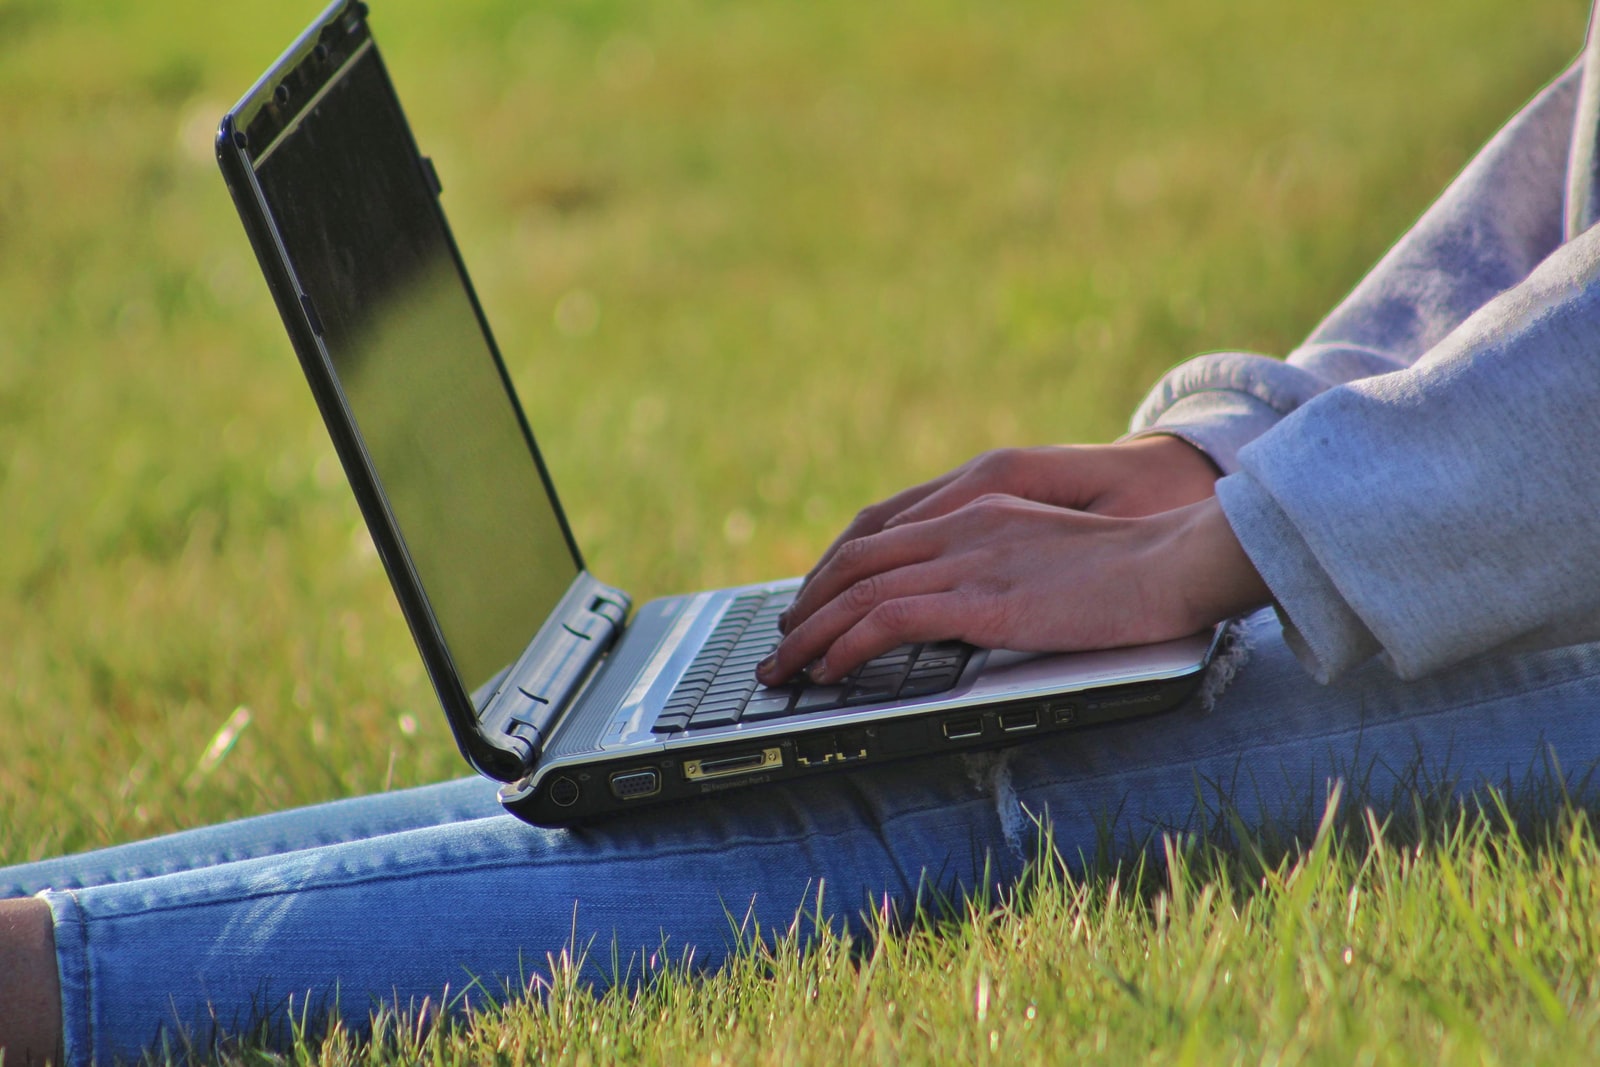 person in blue denim jeans using black laptop computer on green grass field during daytime